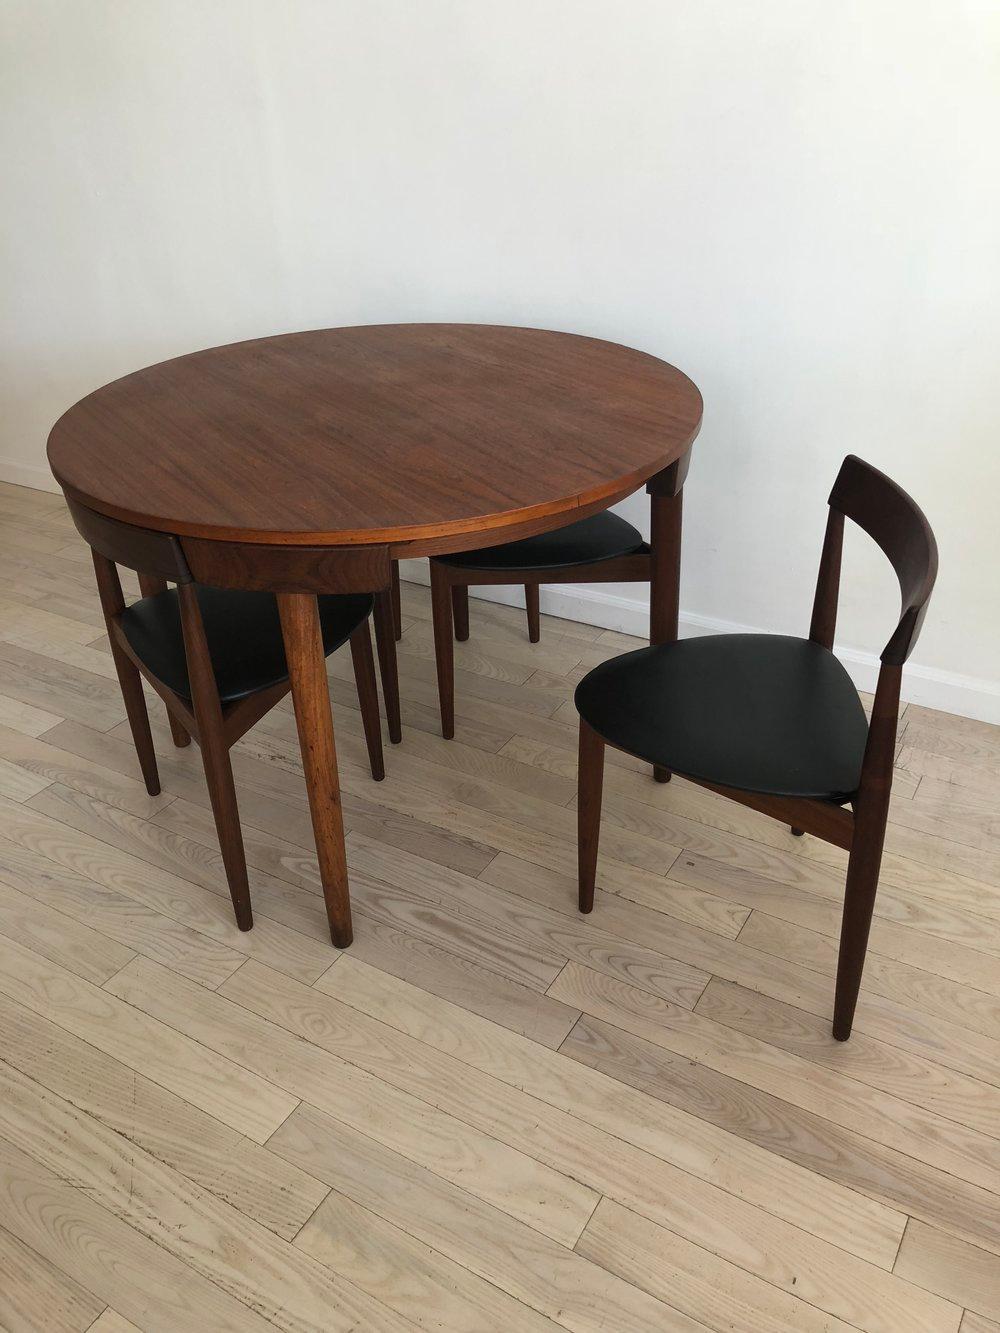 Midcentury Danish Hans Olsen for Frem Rojle teak dining table set. Four chairs that fit into the round dining table. The dining chairs are three-legged. Super rare and beautiful set of furniture. Minor break in one top section of leg that has been